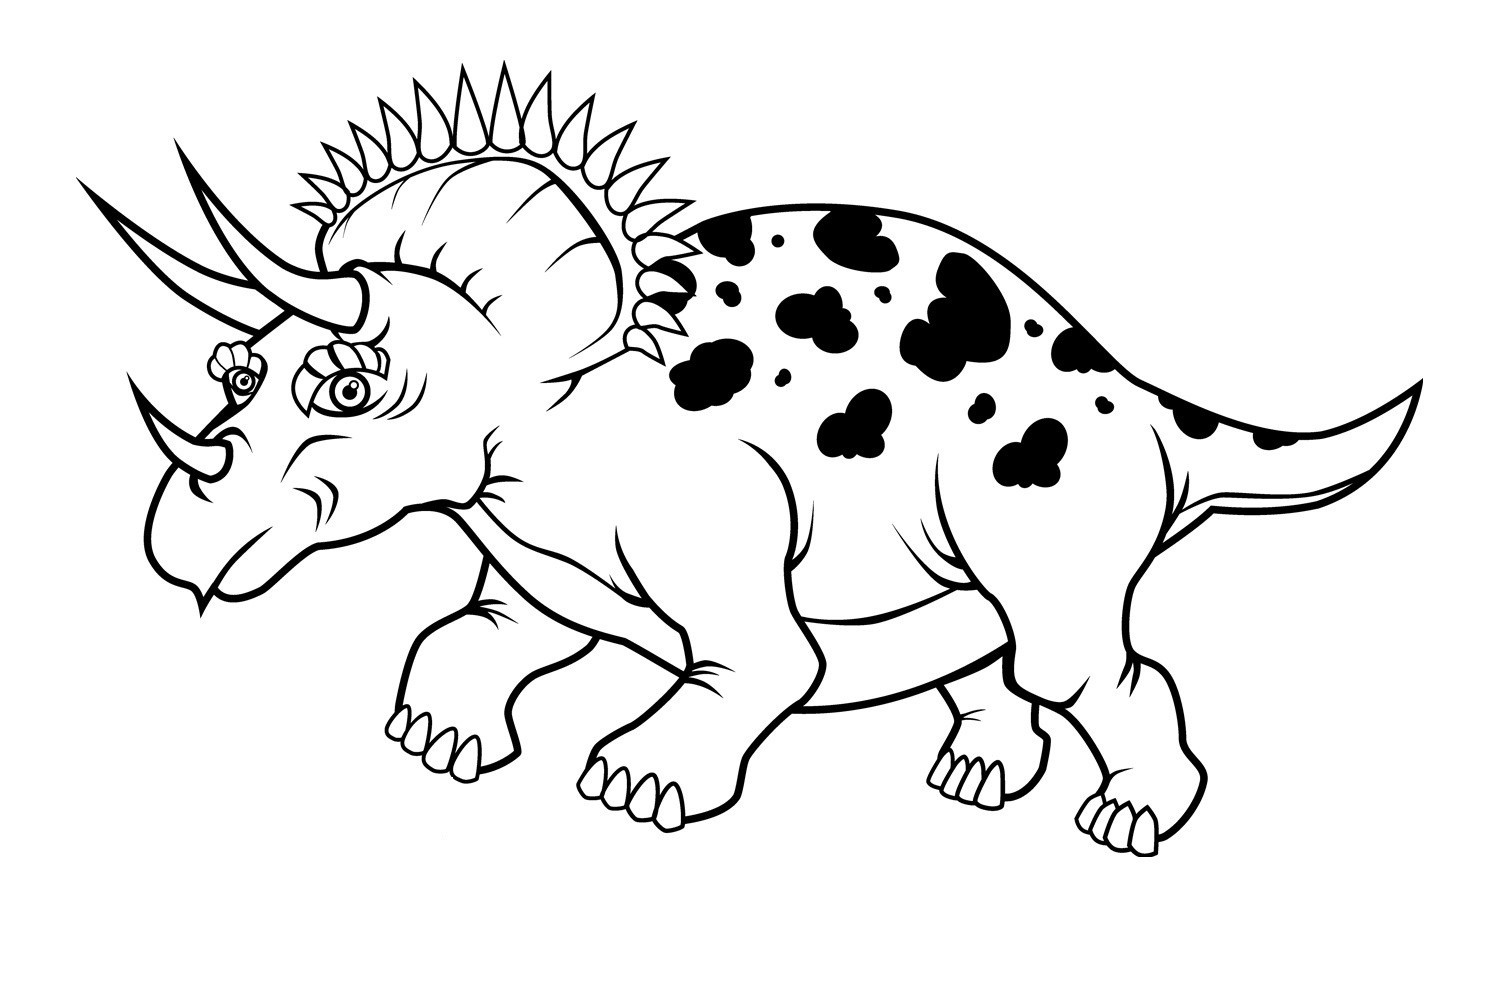 Free Printable Dinosaur Coloring Pages
 Free Printable Triceratops Coloring Pages For Kids